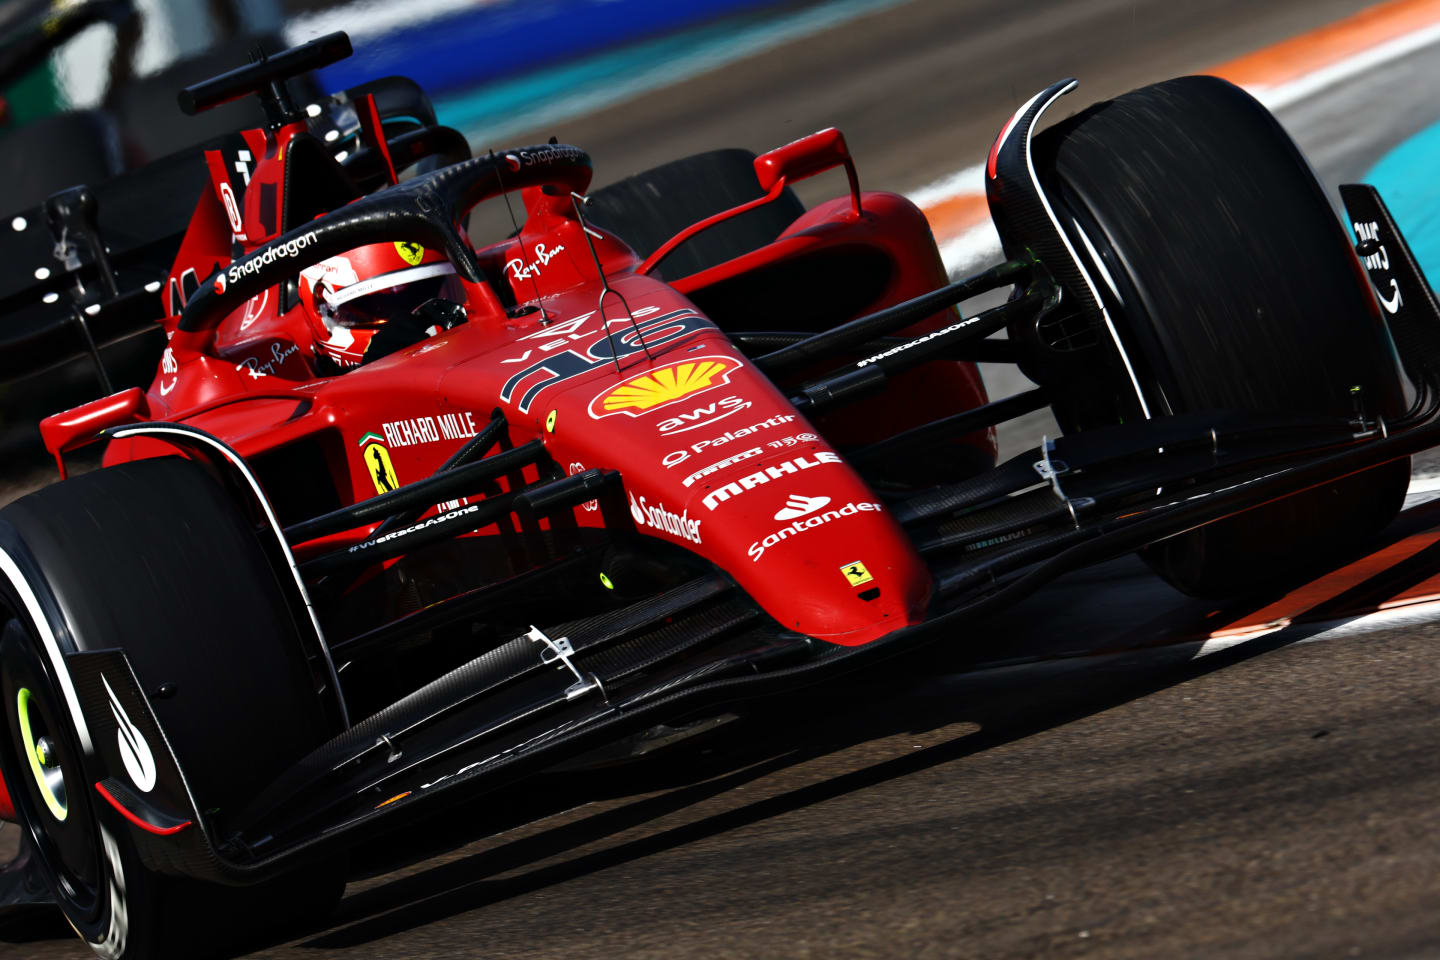 MIAMI, FLORIDA - MAY 08: Charles Leclerc of Monaco driving (16) the Ferrari F1-75 on track during the F1 Grand Prix of Miami at the Miami International Autodrome on May 08, 2022 in Miami, Florida. (Photo by Mark Thompson/Getty Images)